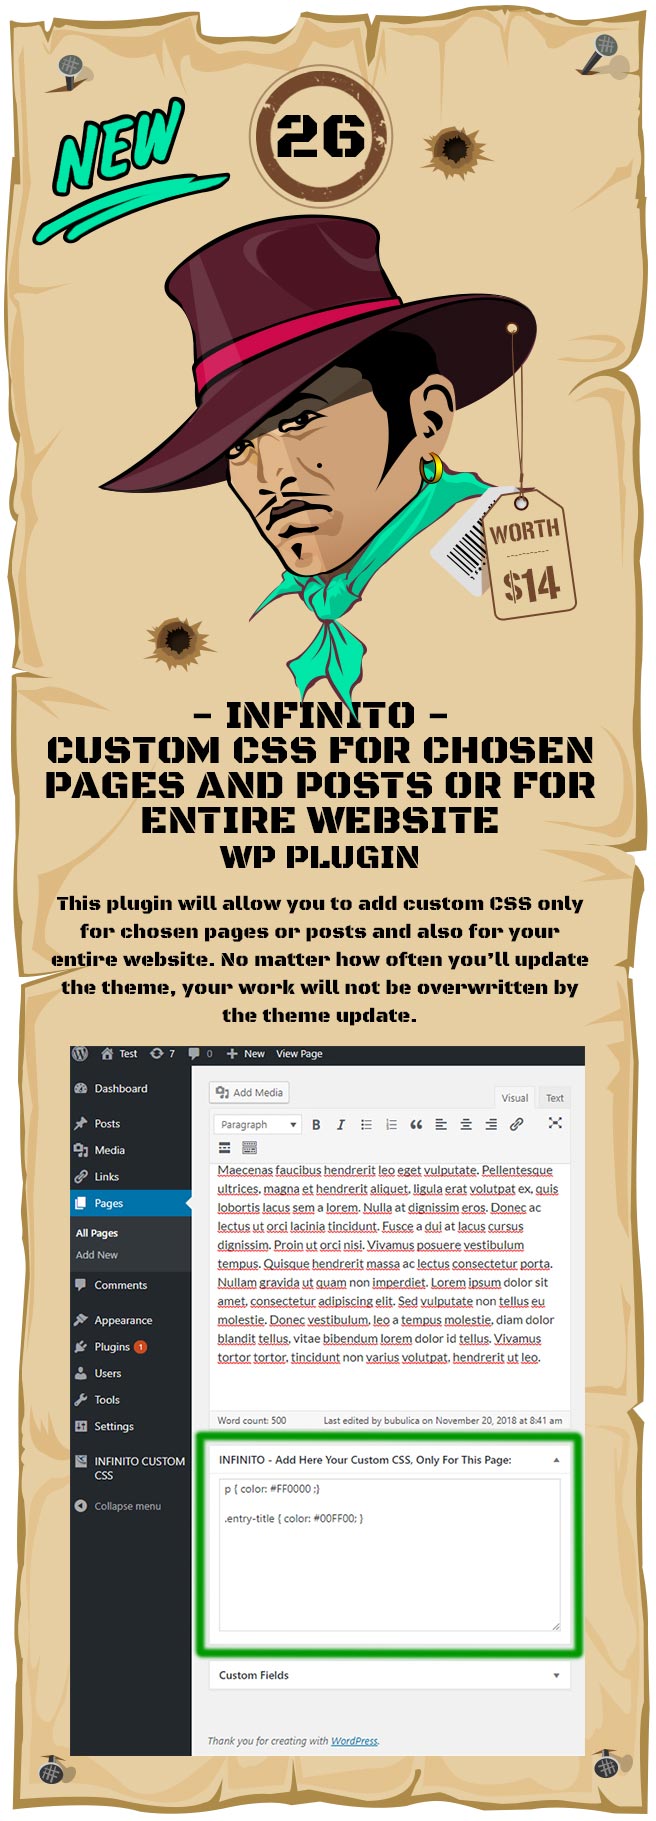 INFINITO - Custom CSS for Chosen Pages and Posts or for Entire Website - WordPress Plugin